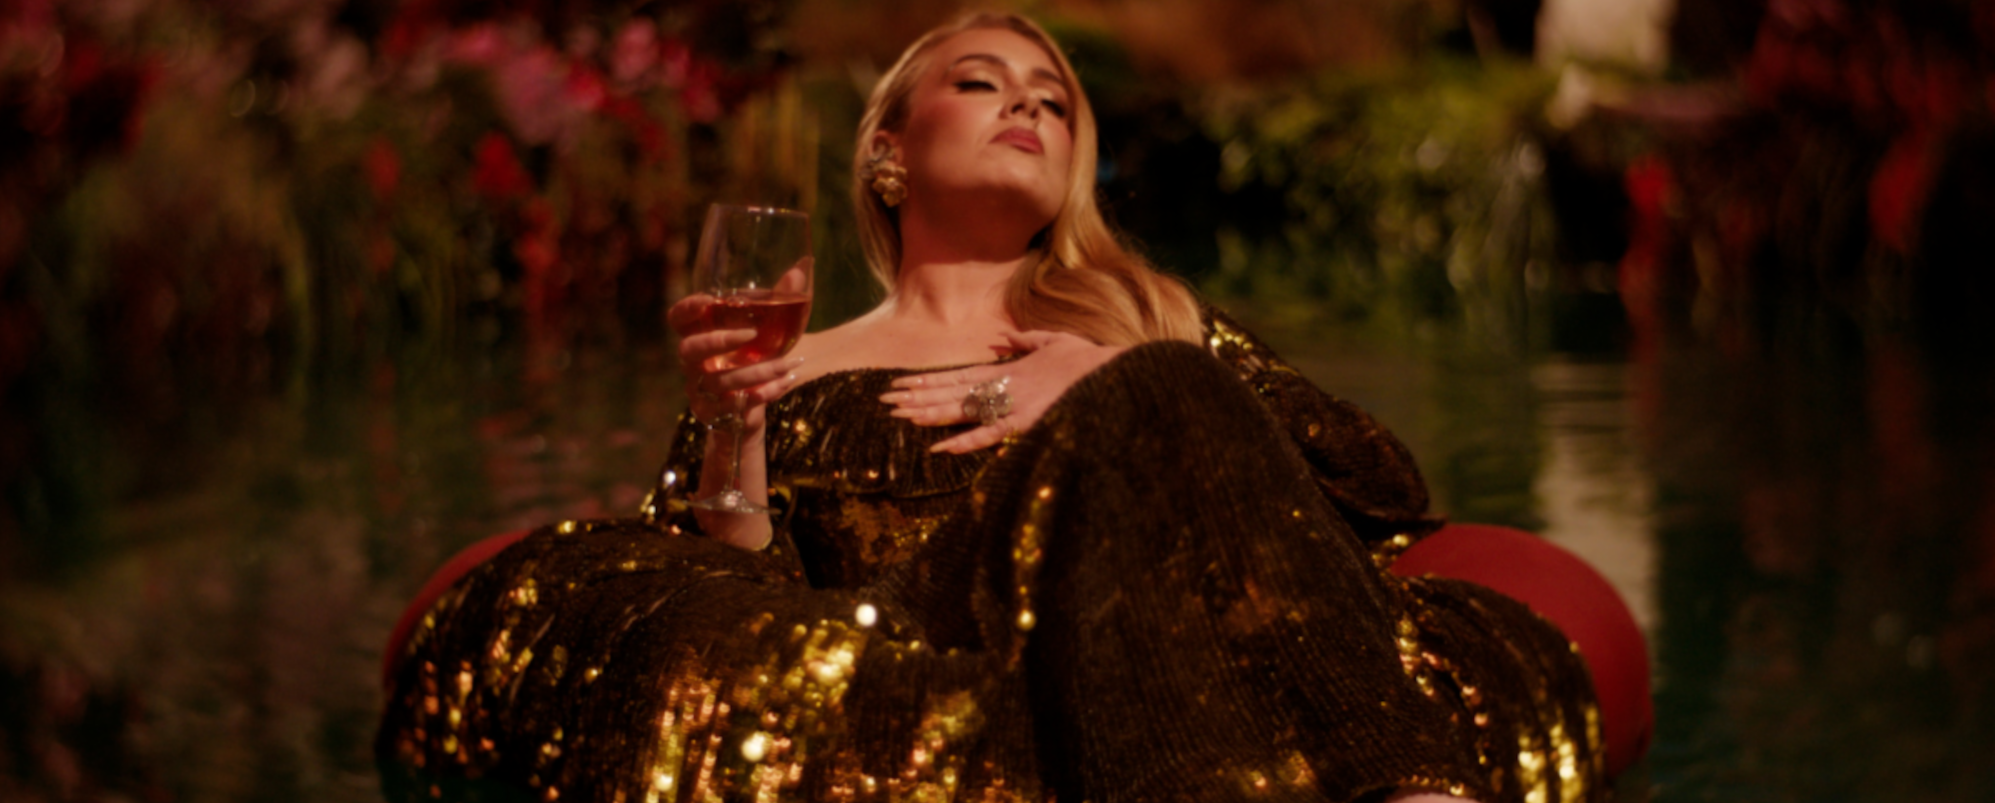 Adele Releases New Floating Video for Hit Single “I Drink Wine”